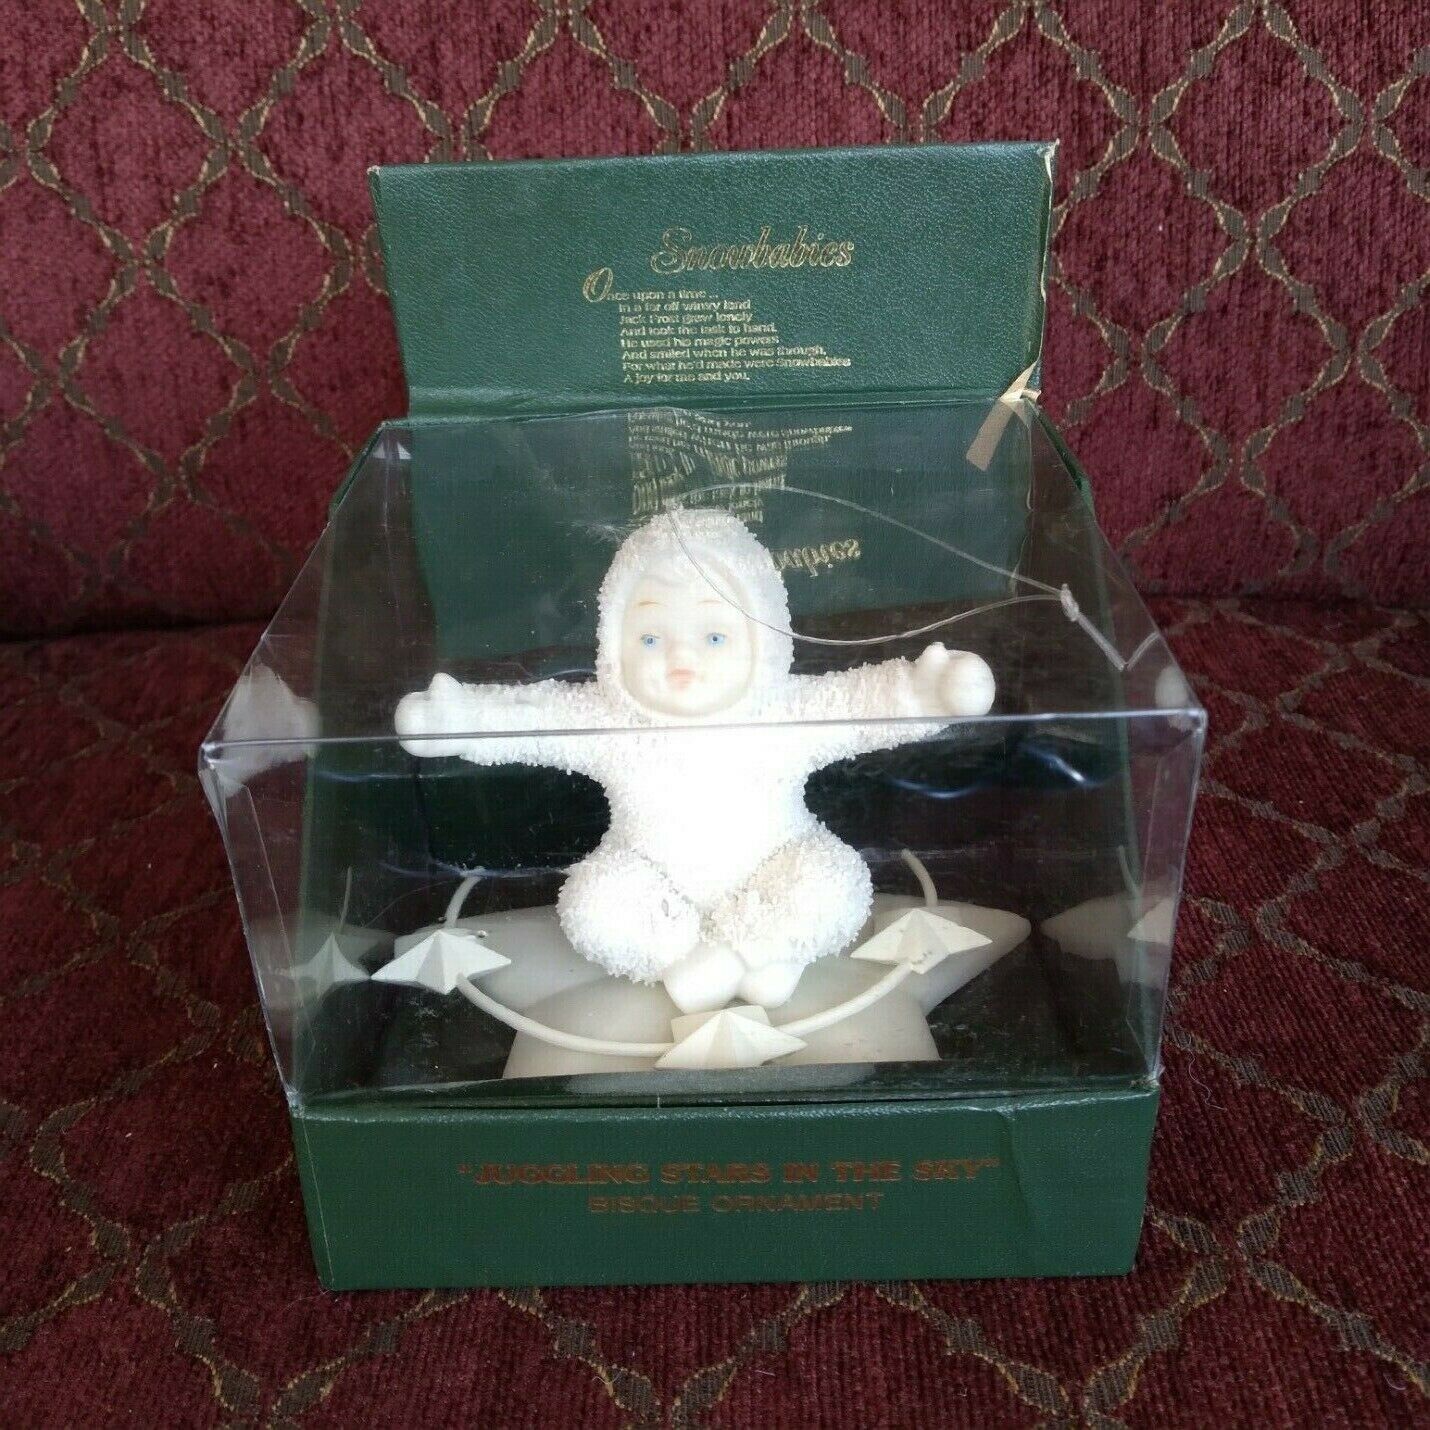 Snowbabies by Department 56 68675 Juggling Stars in the Sky Bisque Ornament - $18.99